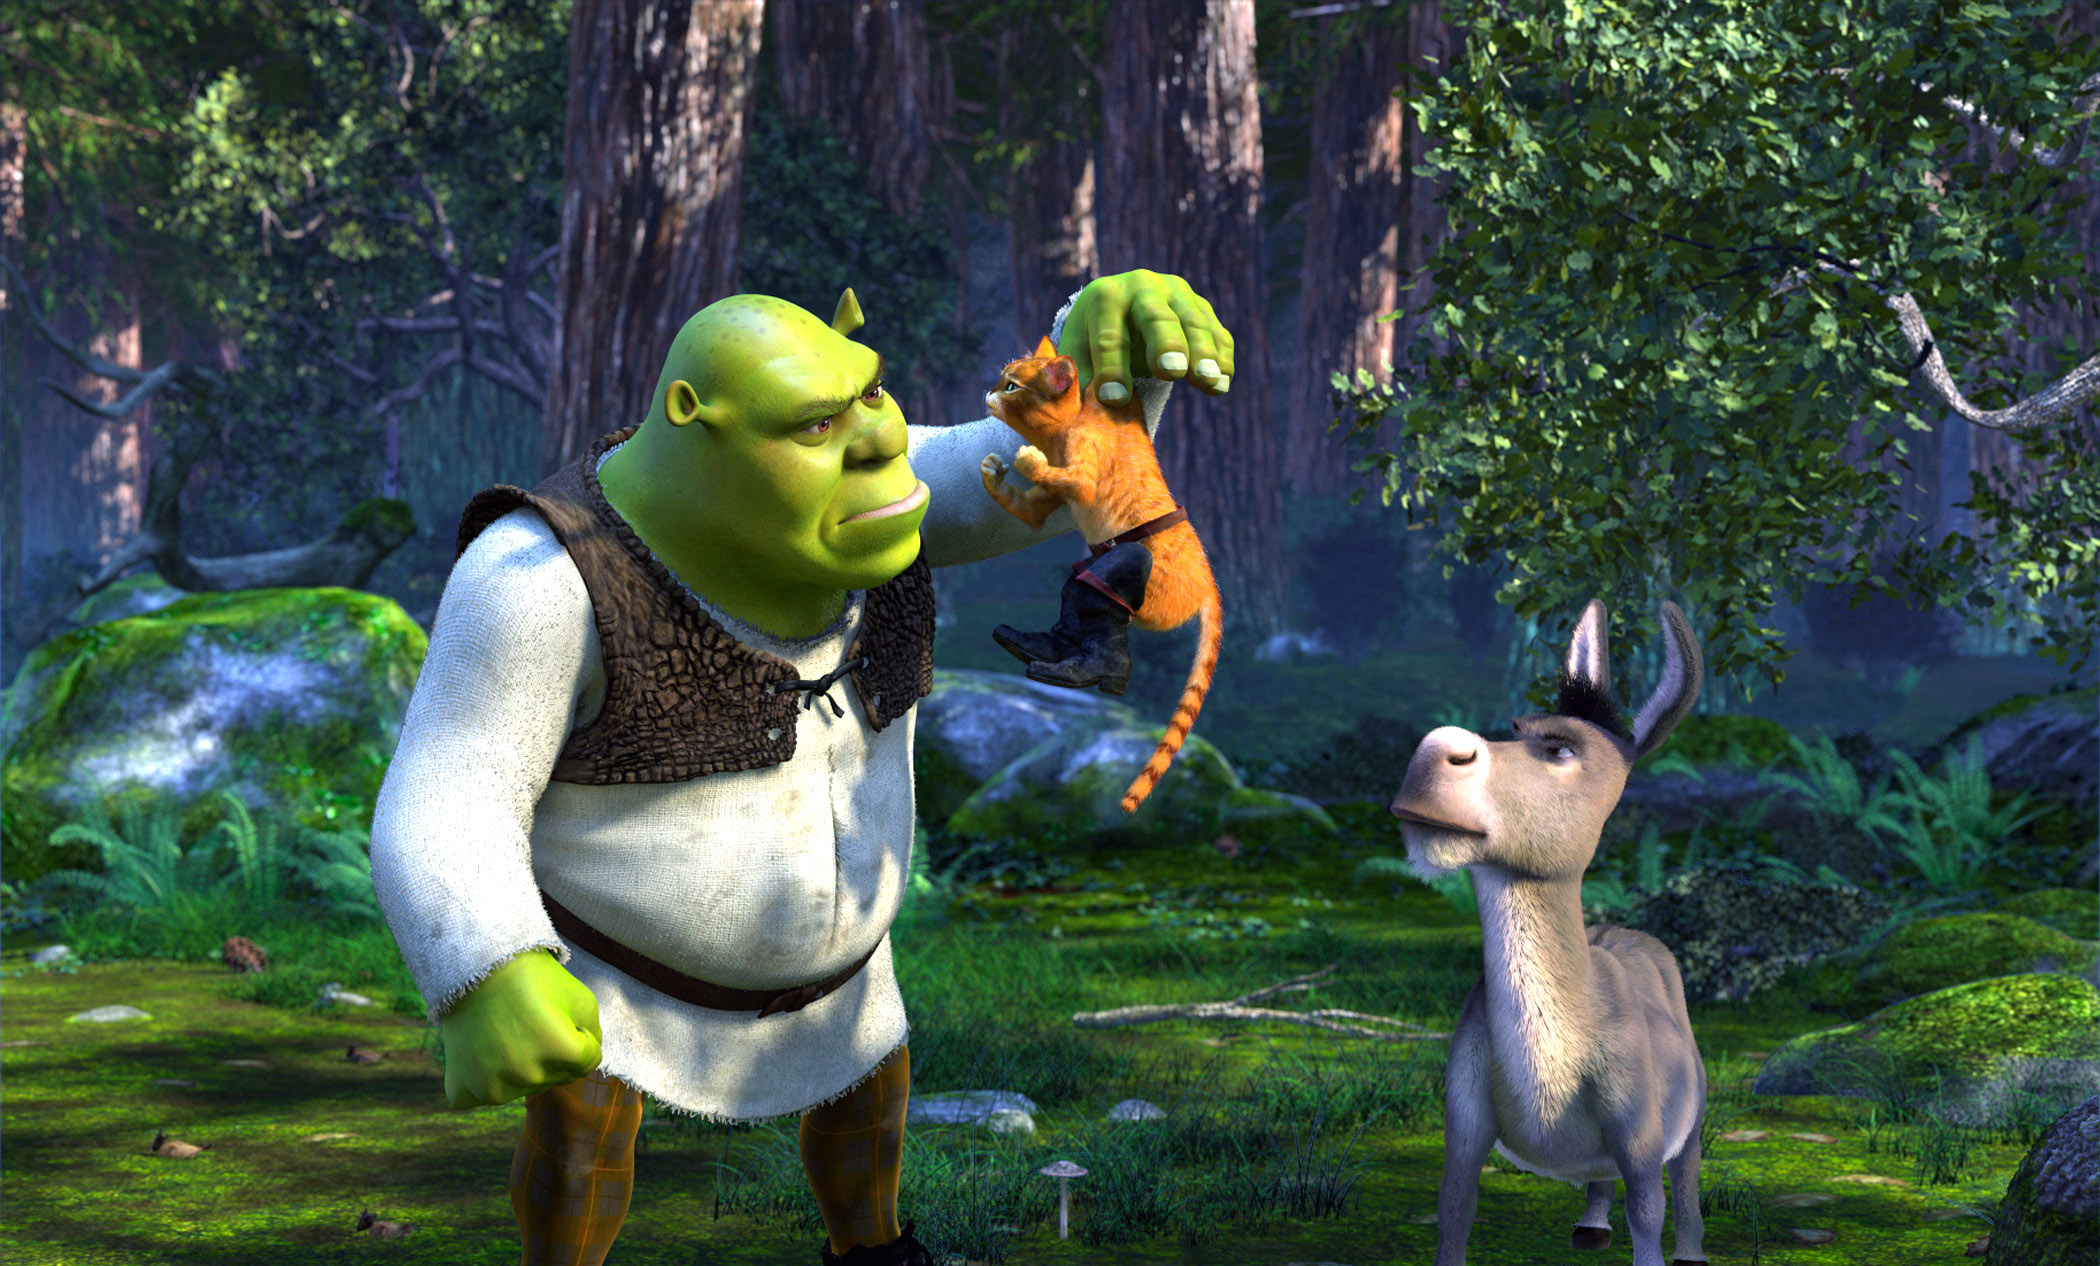 Shrek holding Puss in Boots and donkey looking at them skeptically